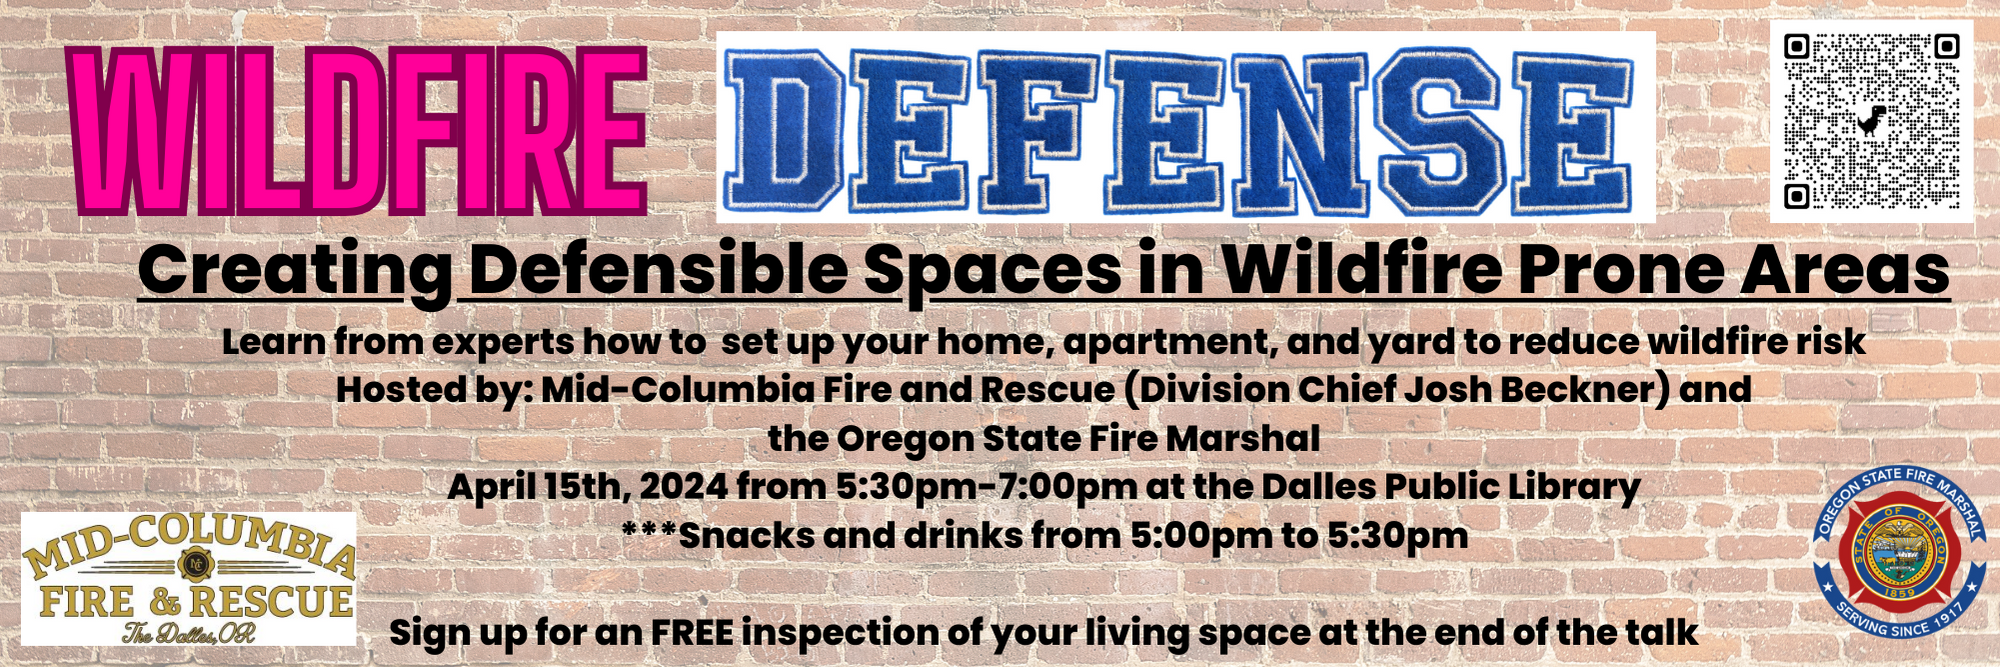 Wildfire Defense April 15th start at 5:30pm at the Dalles Public Library